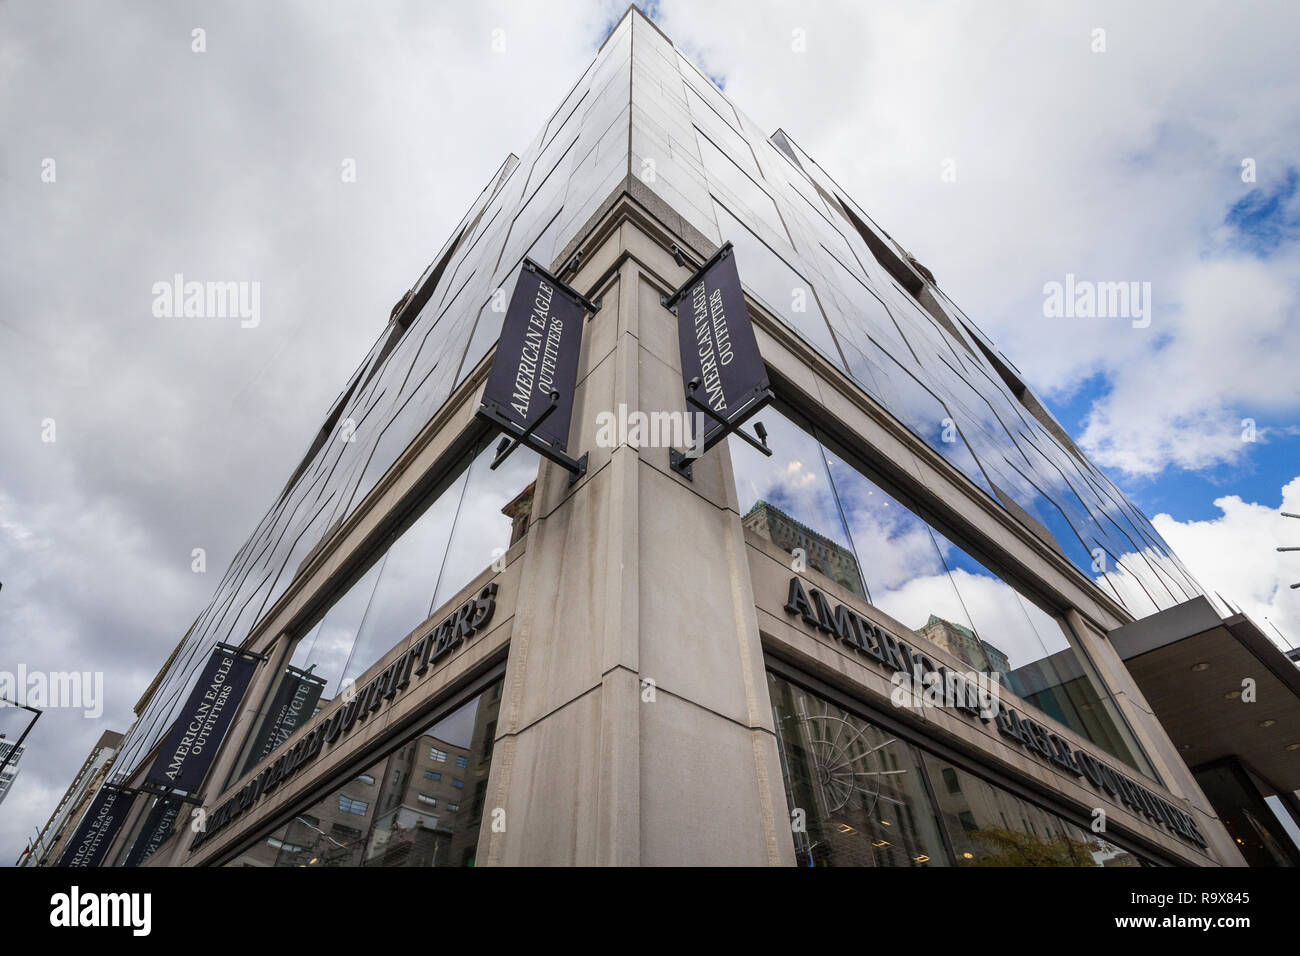 MONTREAL, CANADA - NOVEMBER 6, 2018: American Eagle Outfitters logo in front of a their shop in Montreal, Quebec. American Eagle is a US apparel chain Stock Photo